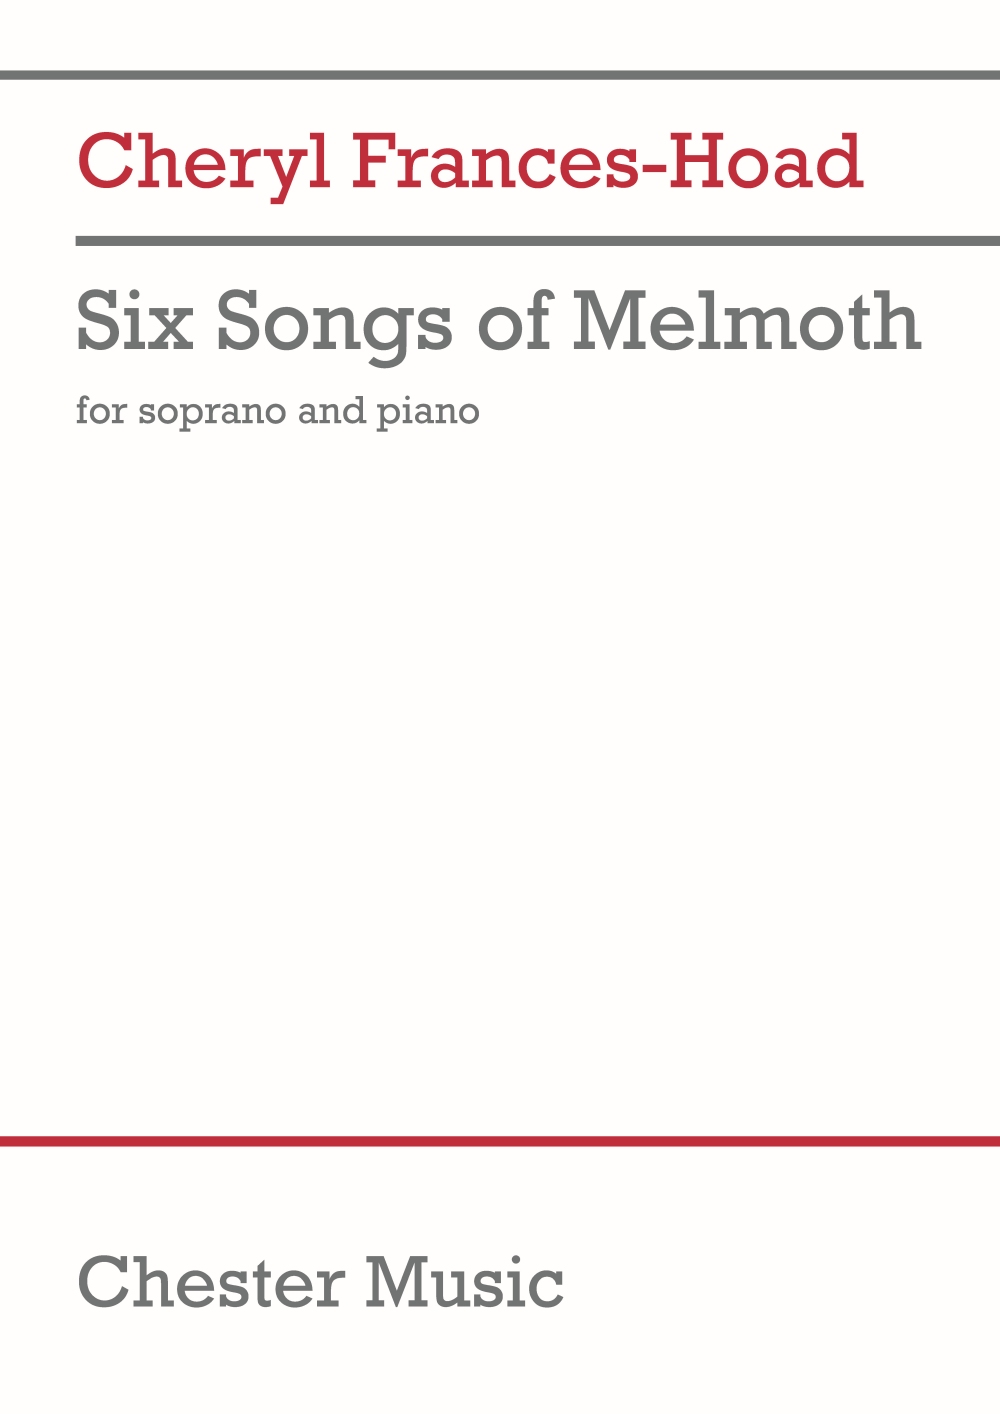 Cheryl Frances-Hoad: Six Songs of Melmoth: Vocal and Piano: Vocal Score